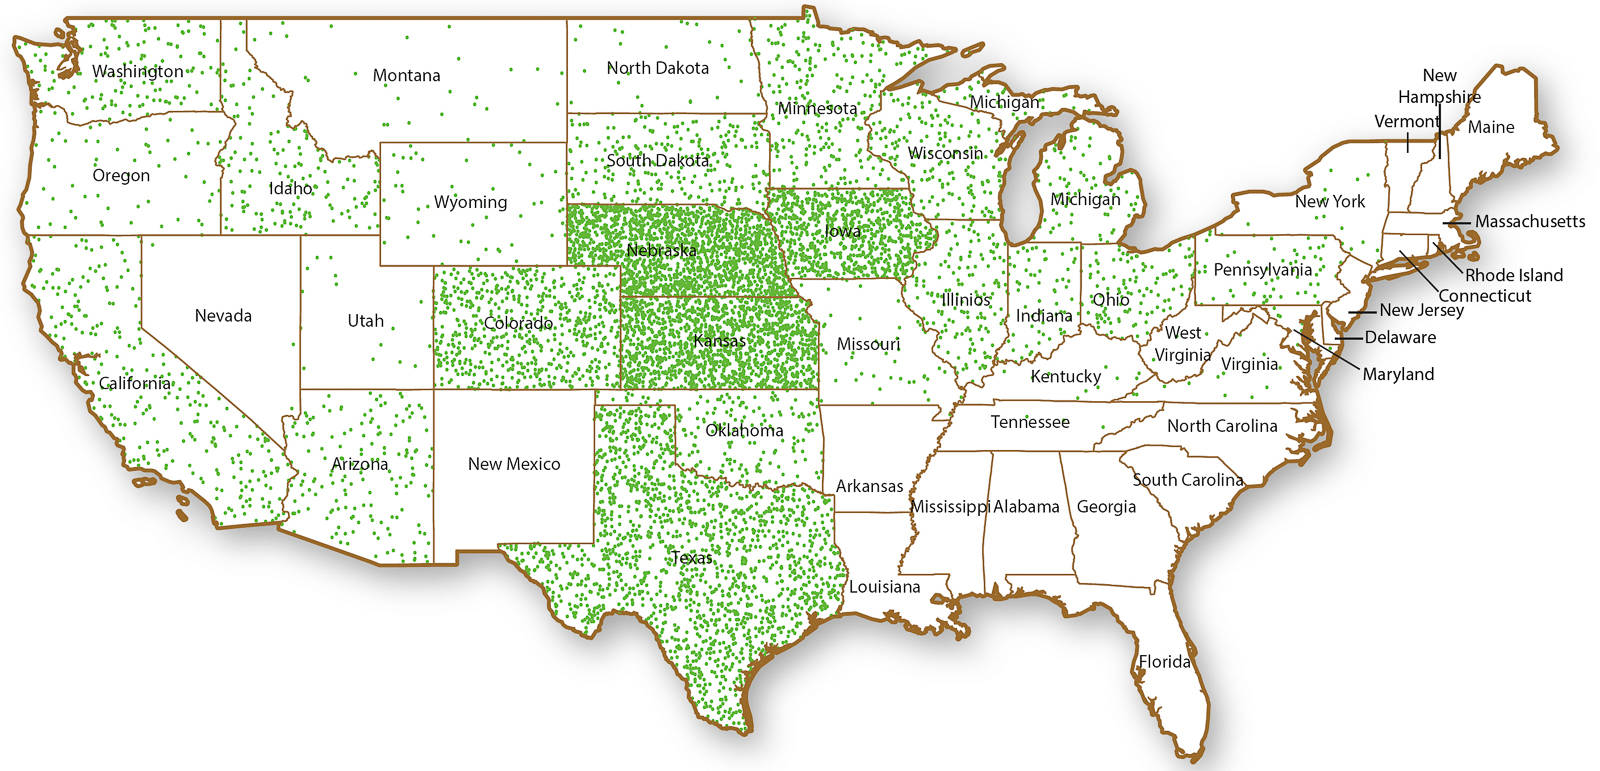 Dot density plot of cattle on feed, January 1, 2015. Map shows state-level inventory totals with each dot representing 1,500 head. Cattle on feed are defined as those animals being fed a ration of grain, silage, hay or protein supplements and expected to produce a carcass that will grade Select or better. States with few cattle on feed are aggregated into an “other states” category, which accounts for a total of 56,000 head (0.4%). Source: Cattle on Feed Inventory, January 1, 2015. U.S. Department of Agriculture, National Agricultural Statistics Service.